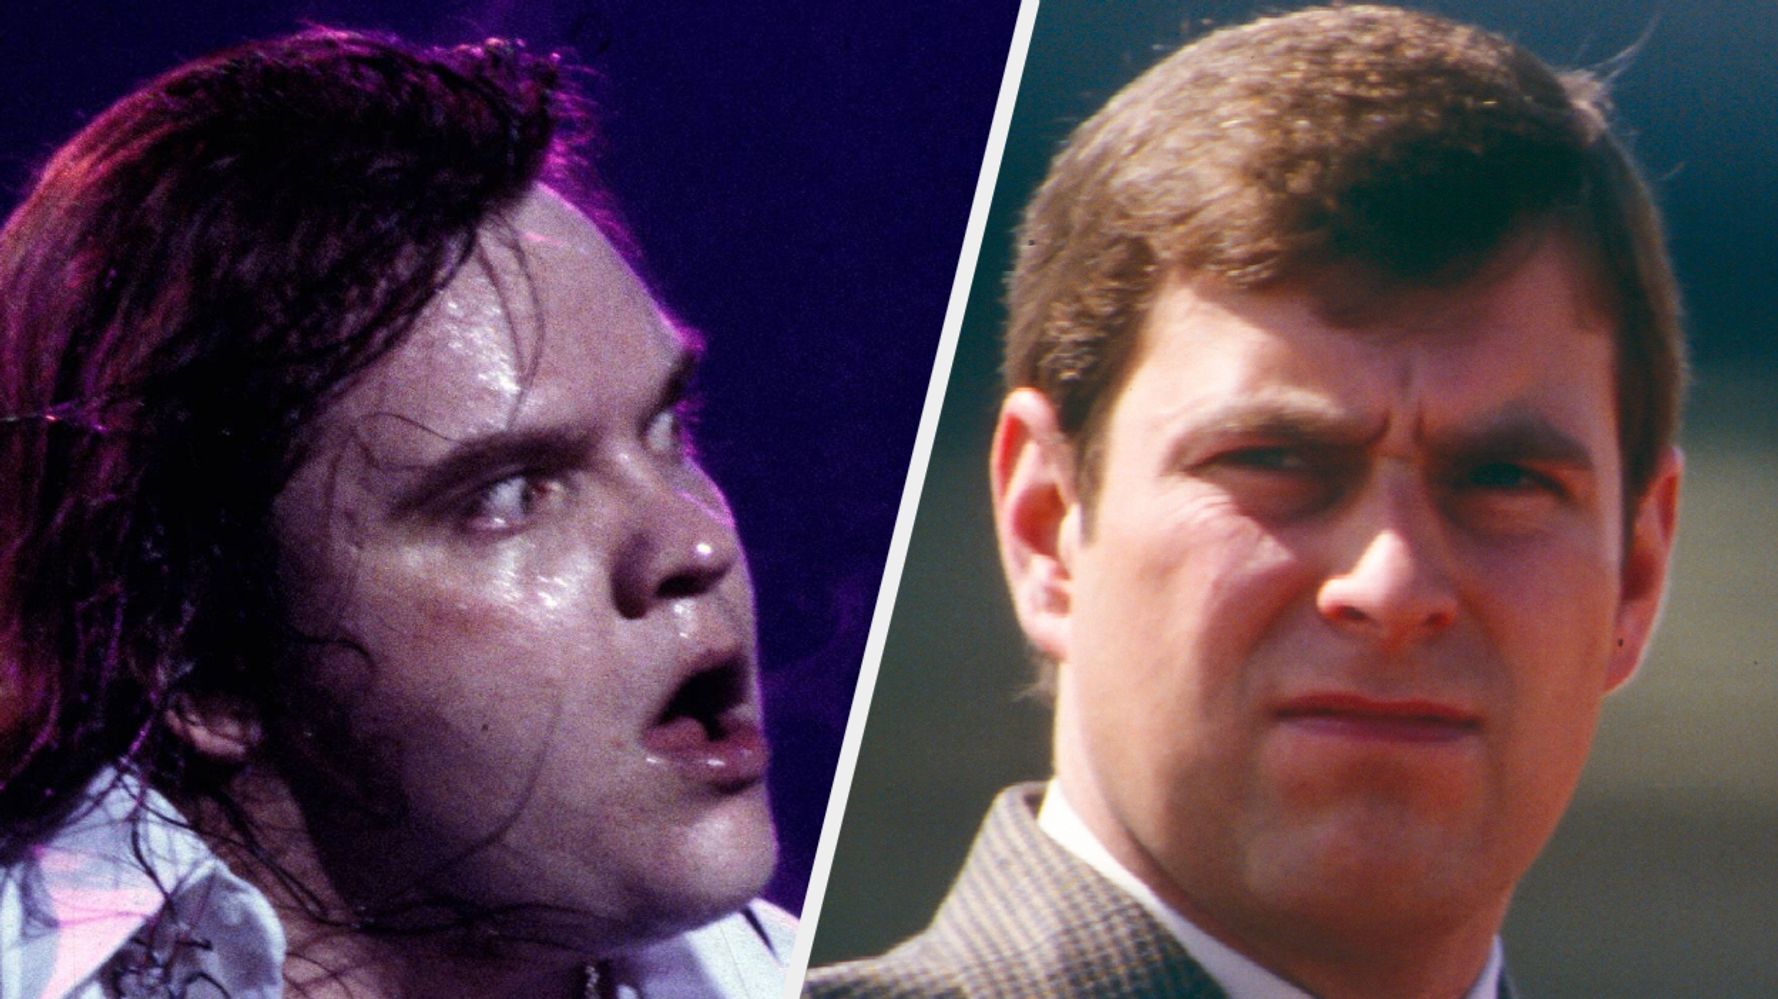 Meat Loaf Once Threatened To Push ‘Jealous’ Prince Andrew Into A Moat: ‘I Don’t Give A S*** Who You Are’